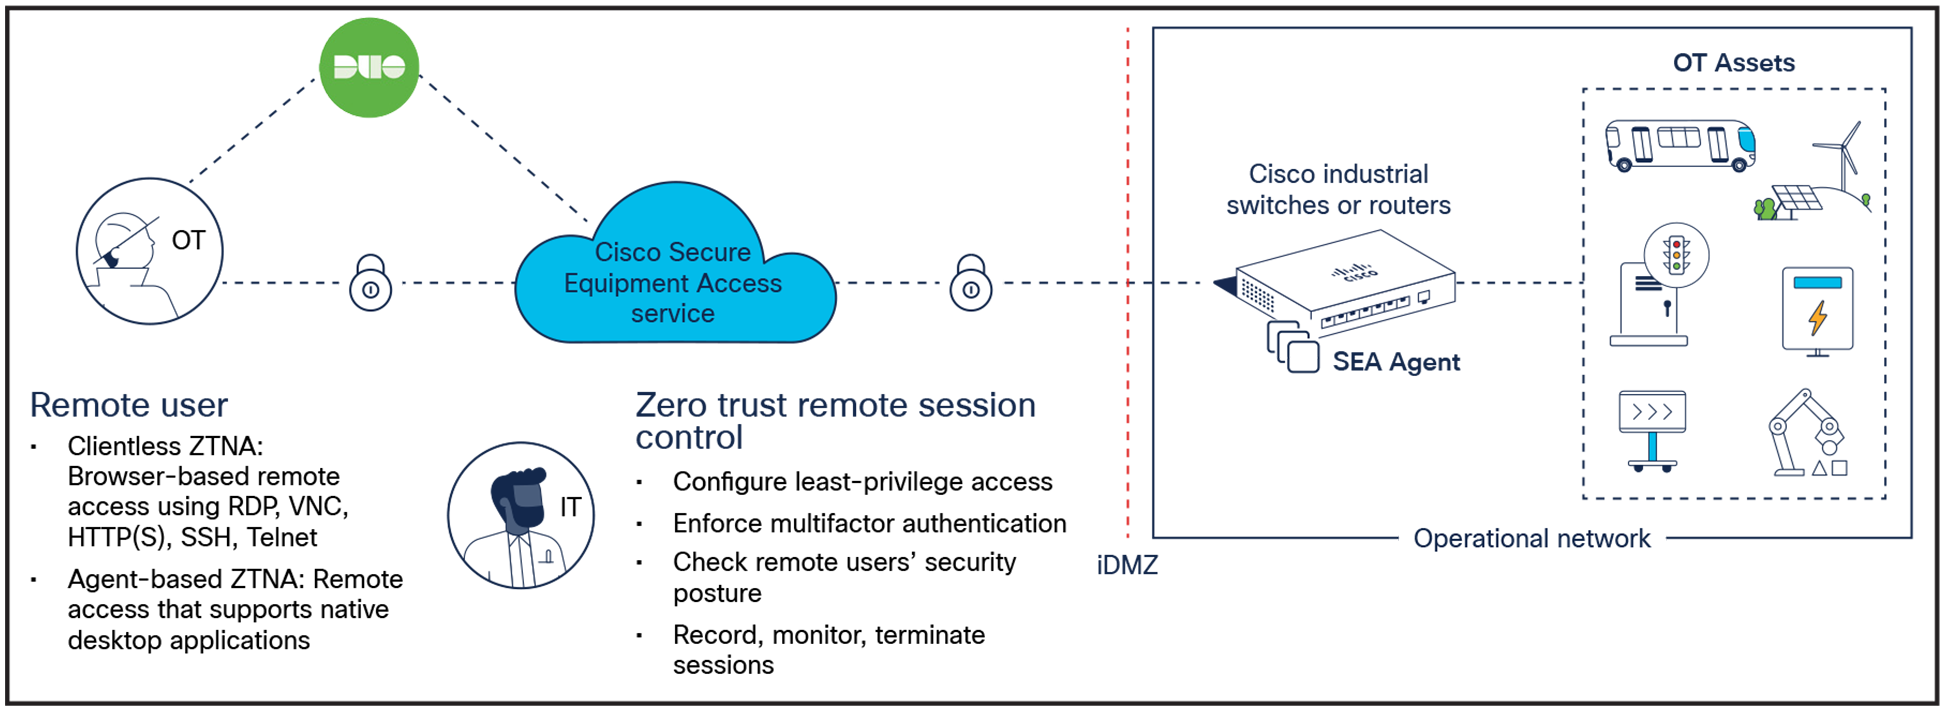 Cisco SEA embeds secure remote access capabilities into industrial switches and routers